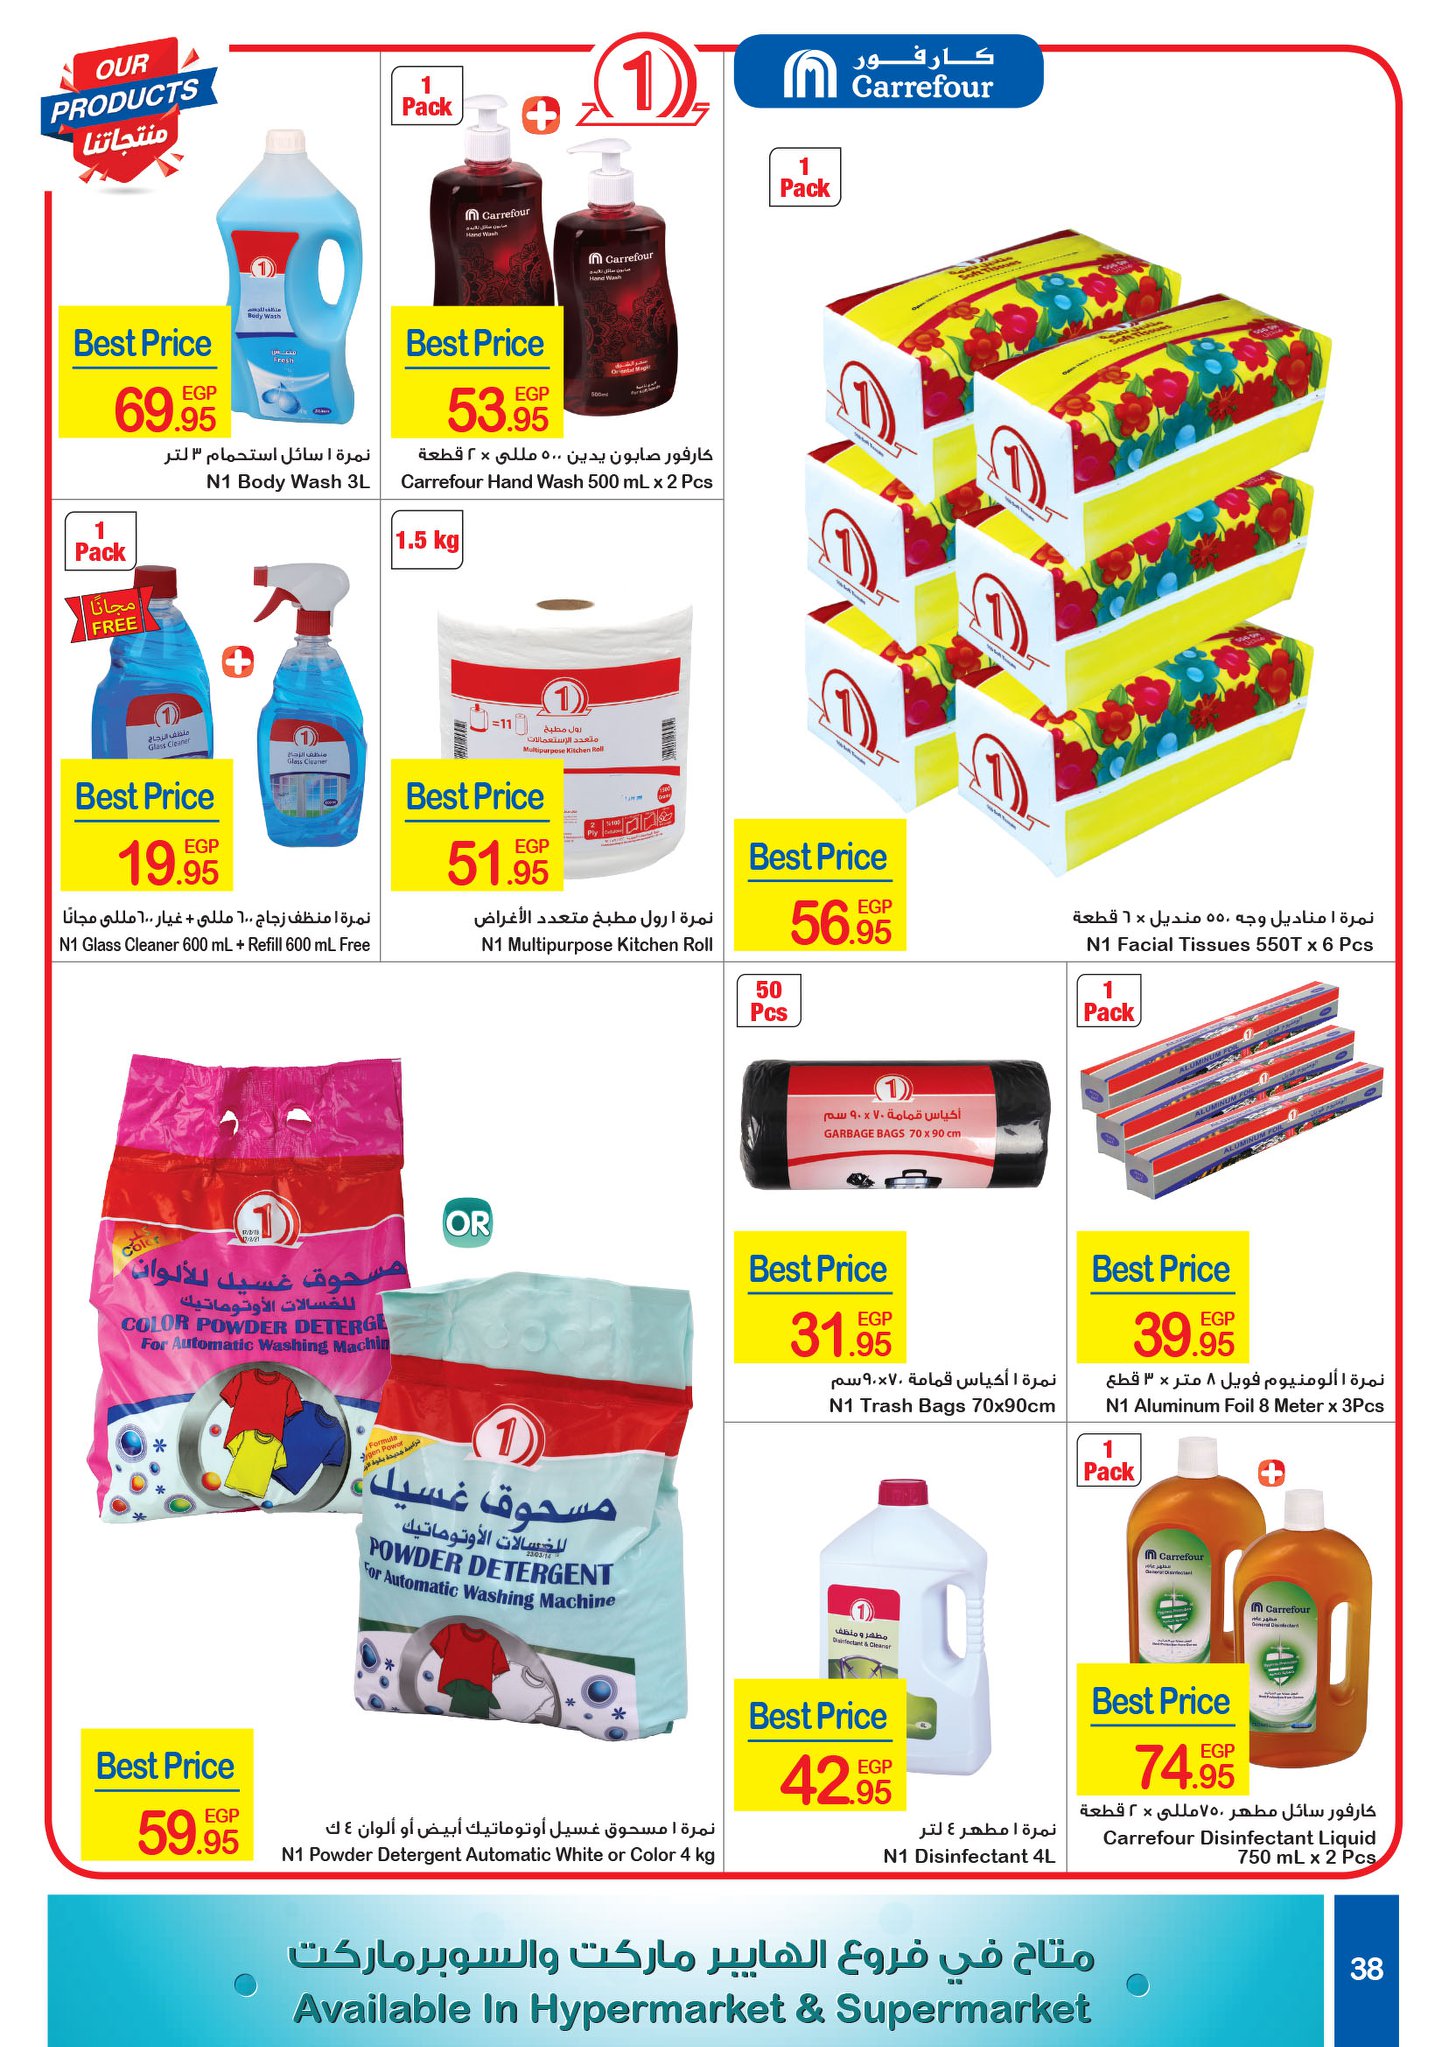 Carrefour Flyer from 16/7 till 27/7 | Carrefour Egypt 37